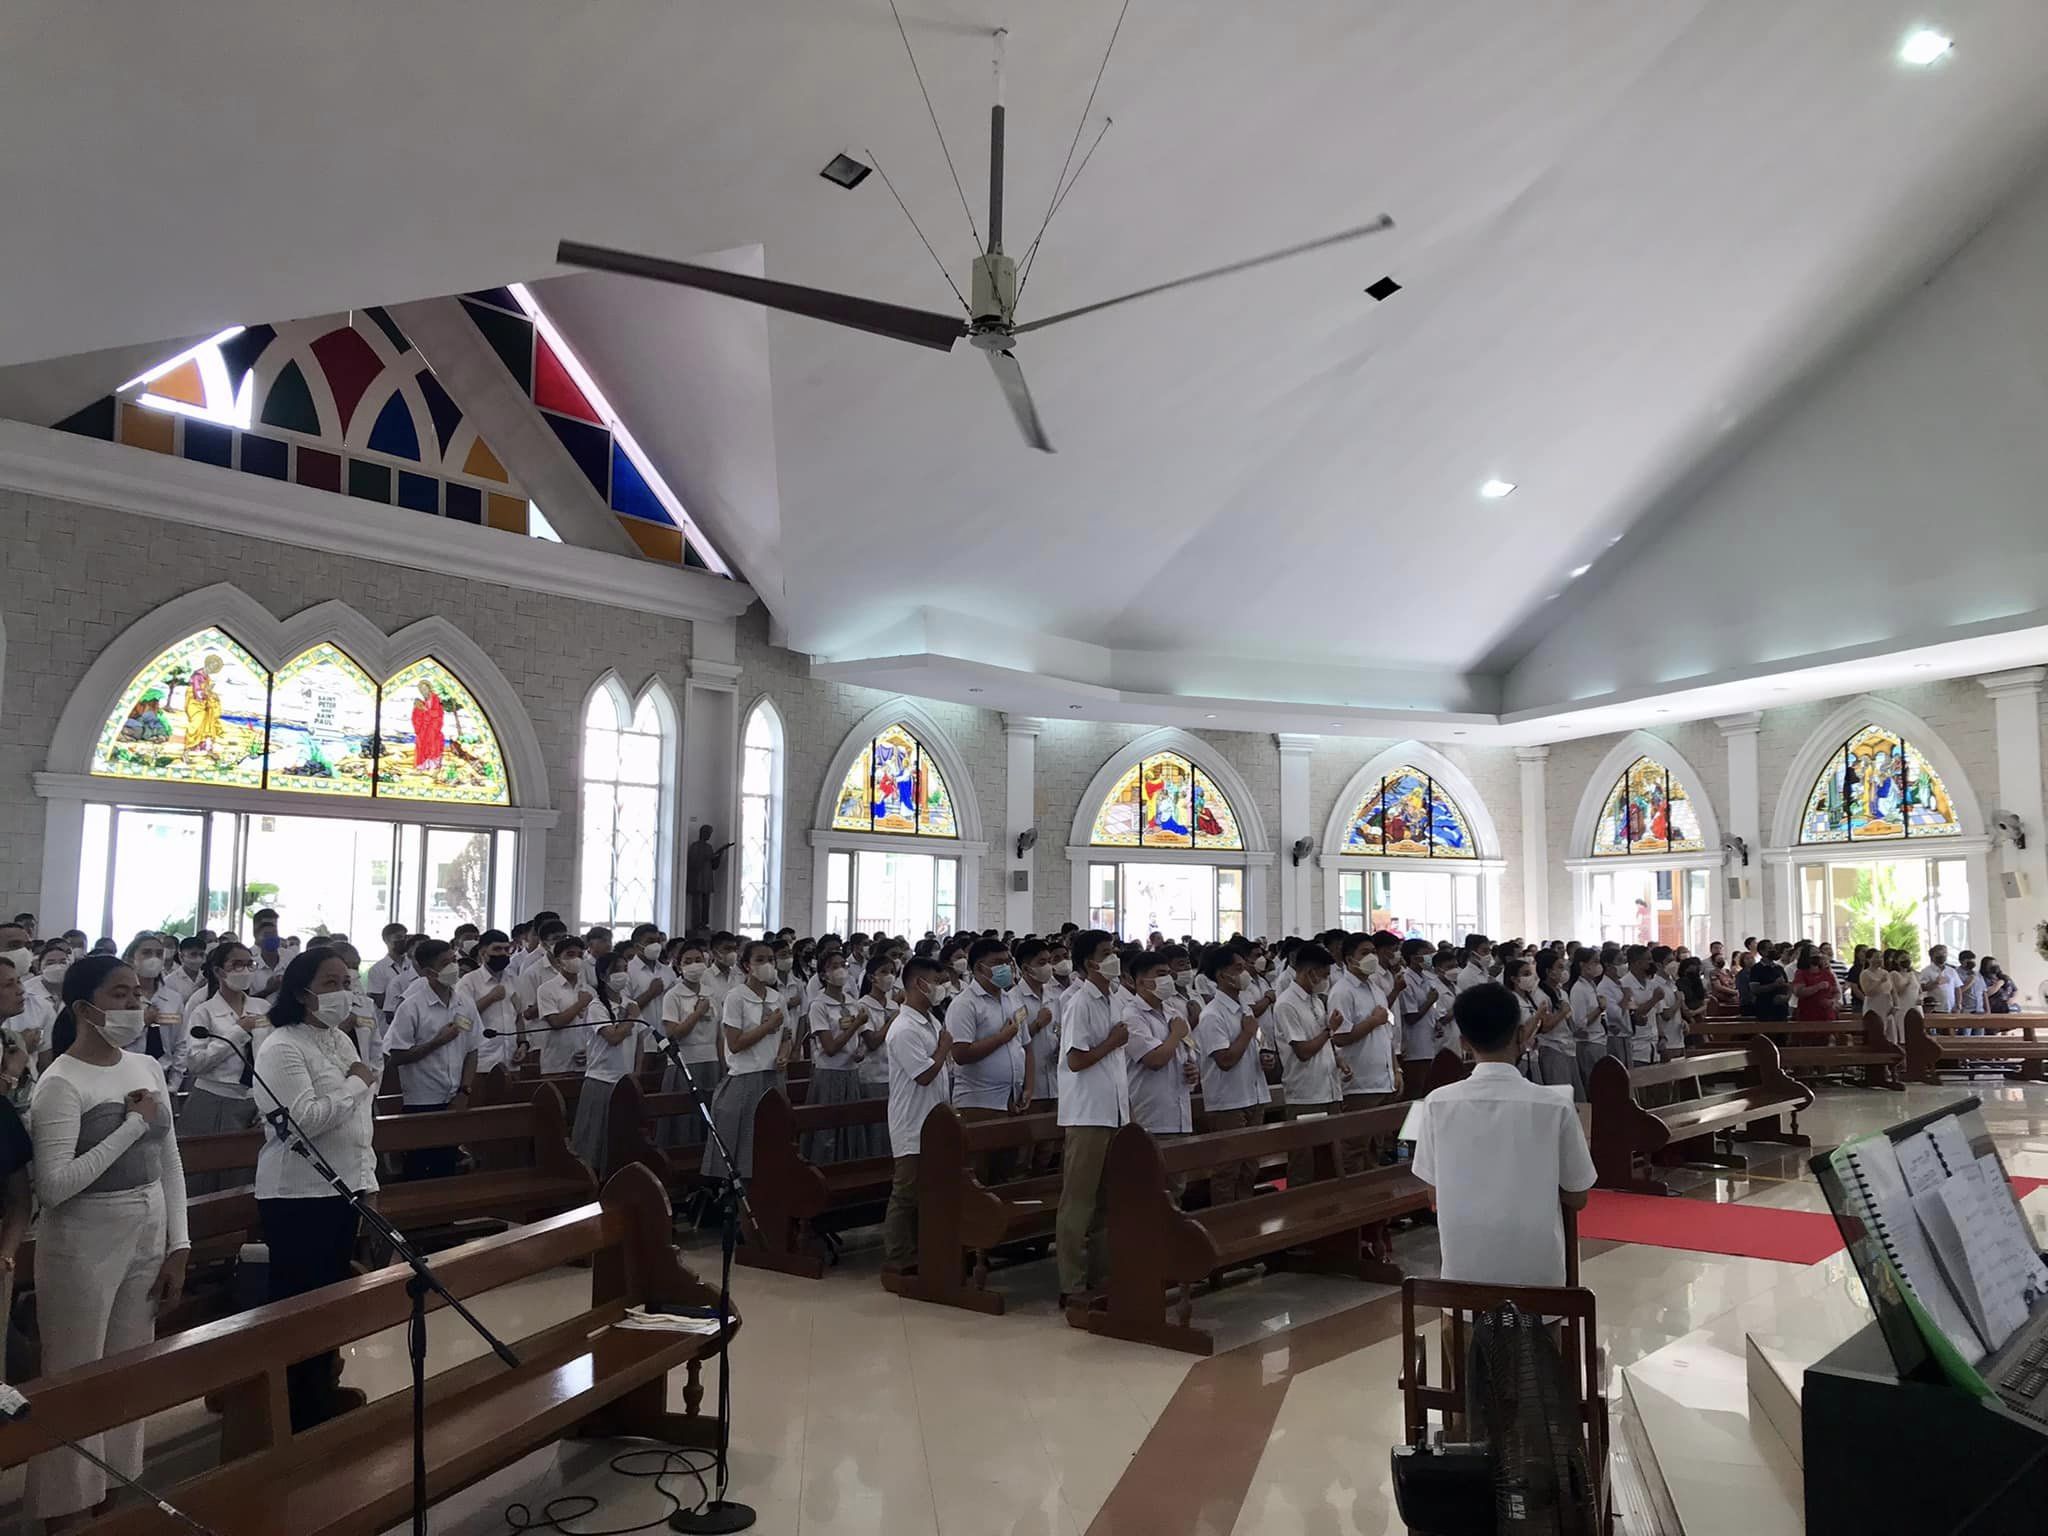 JUST IN: Paulinians receive the Sacrament of Confirmation